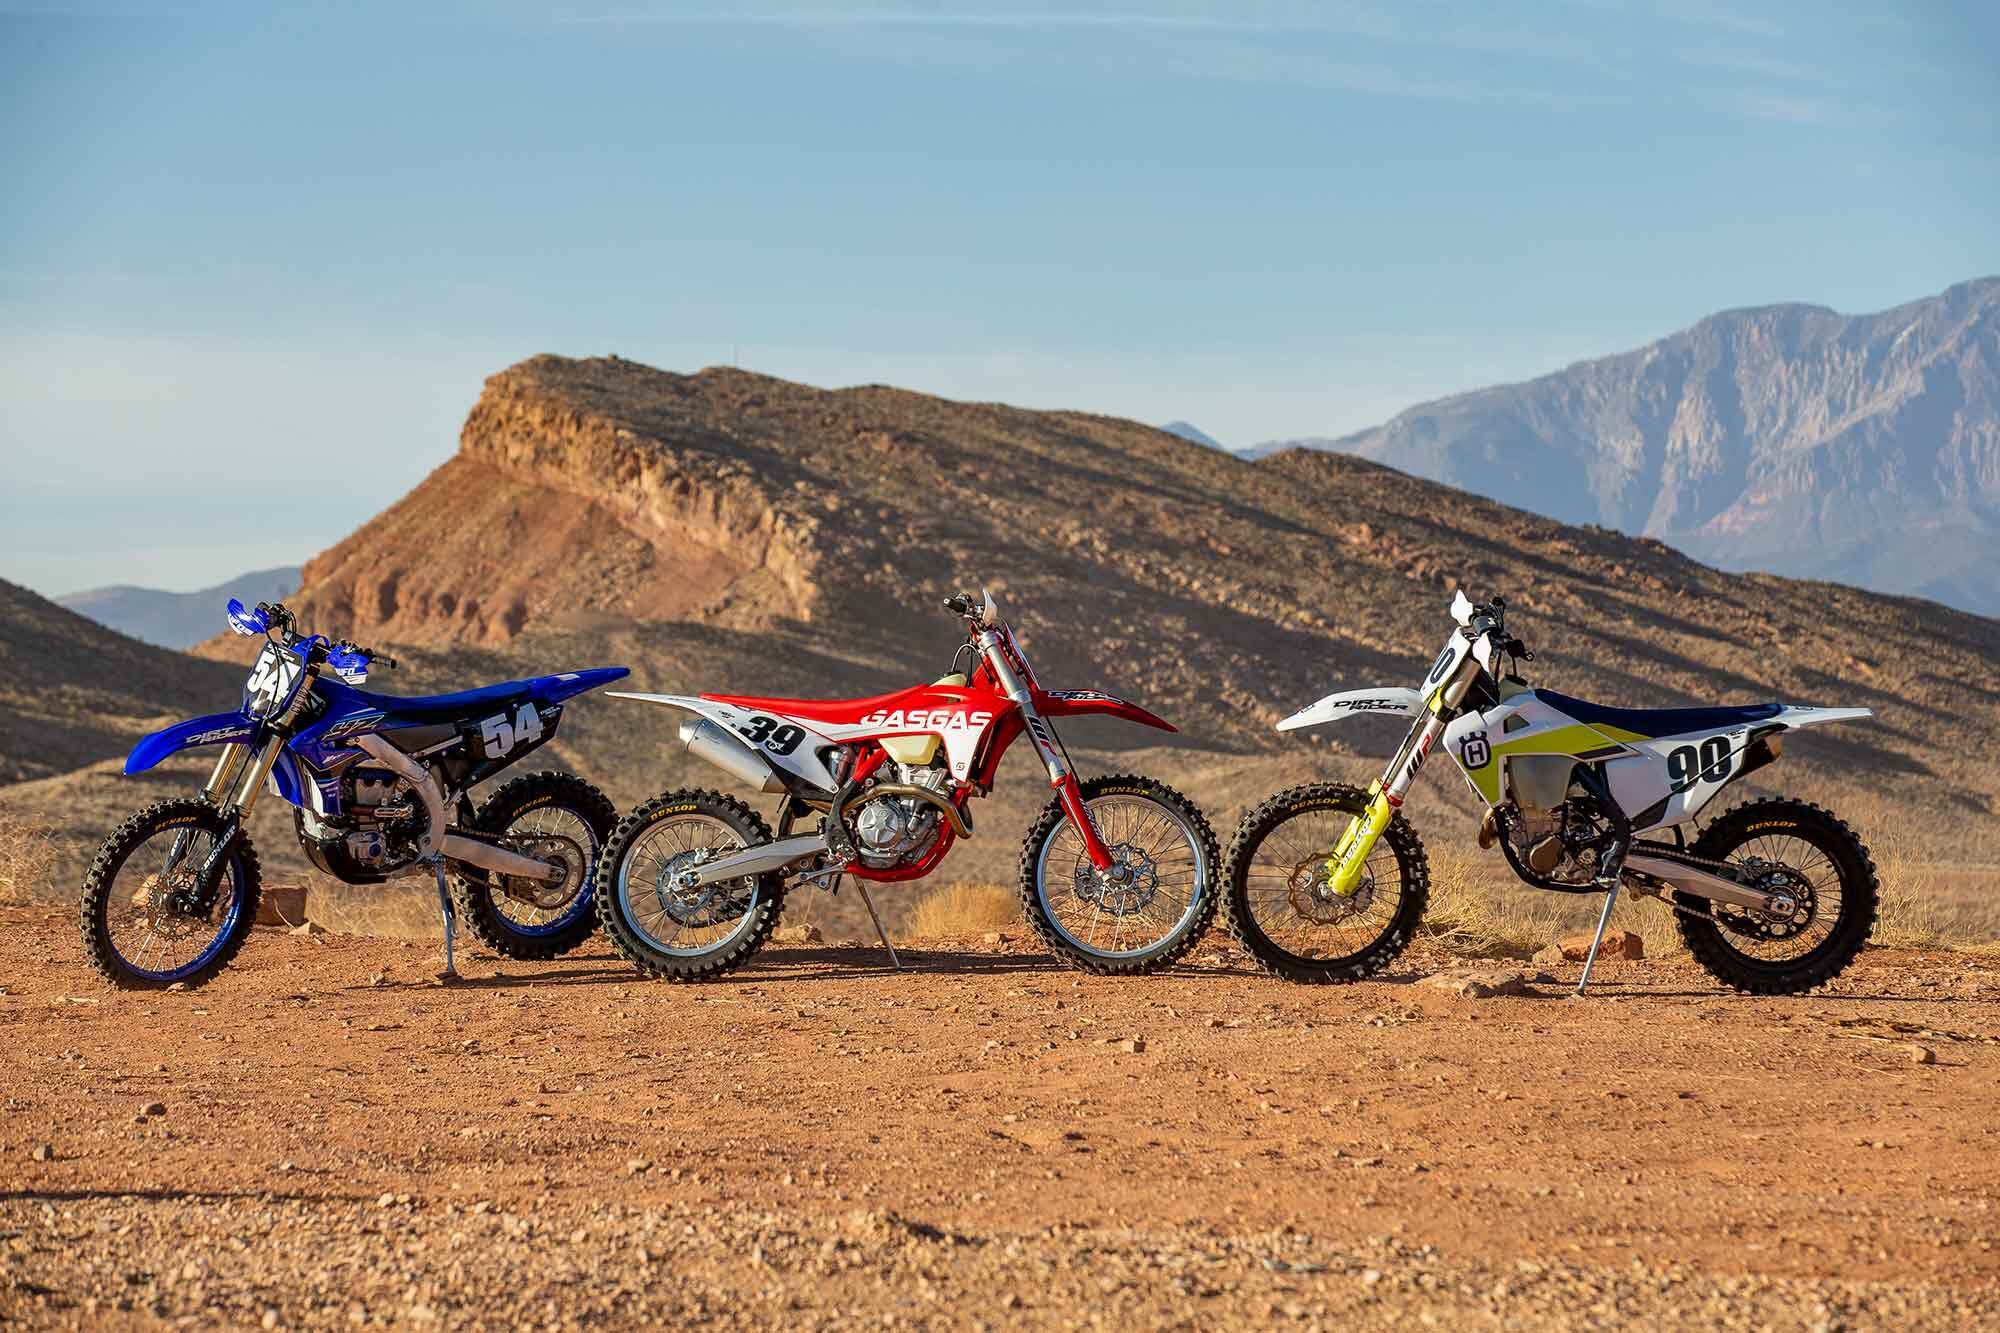 Yamaha has stuck with a tried-and-true coil-spring fork on its dirt bikes over the years, while GasGas’ and Husqvarna’s motocross and cross-country models use an air fork.